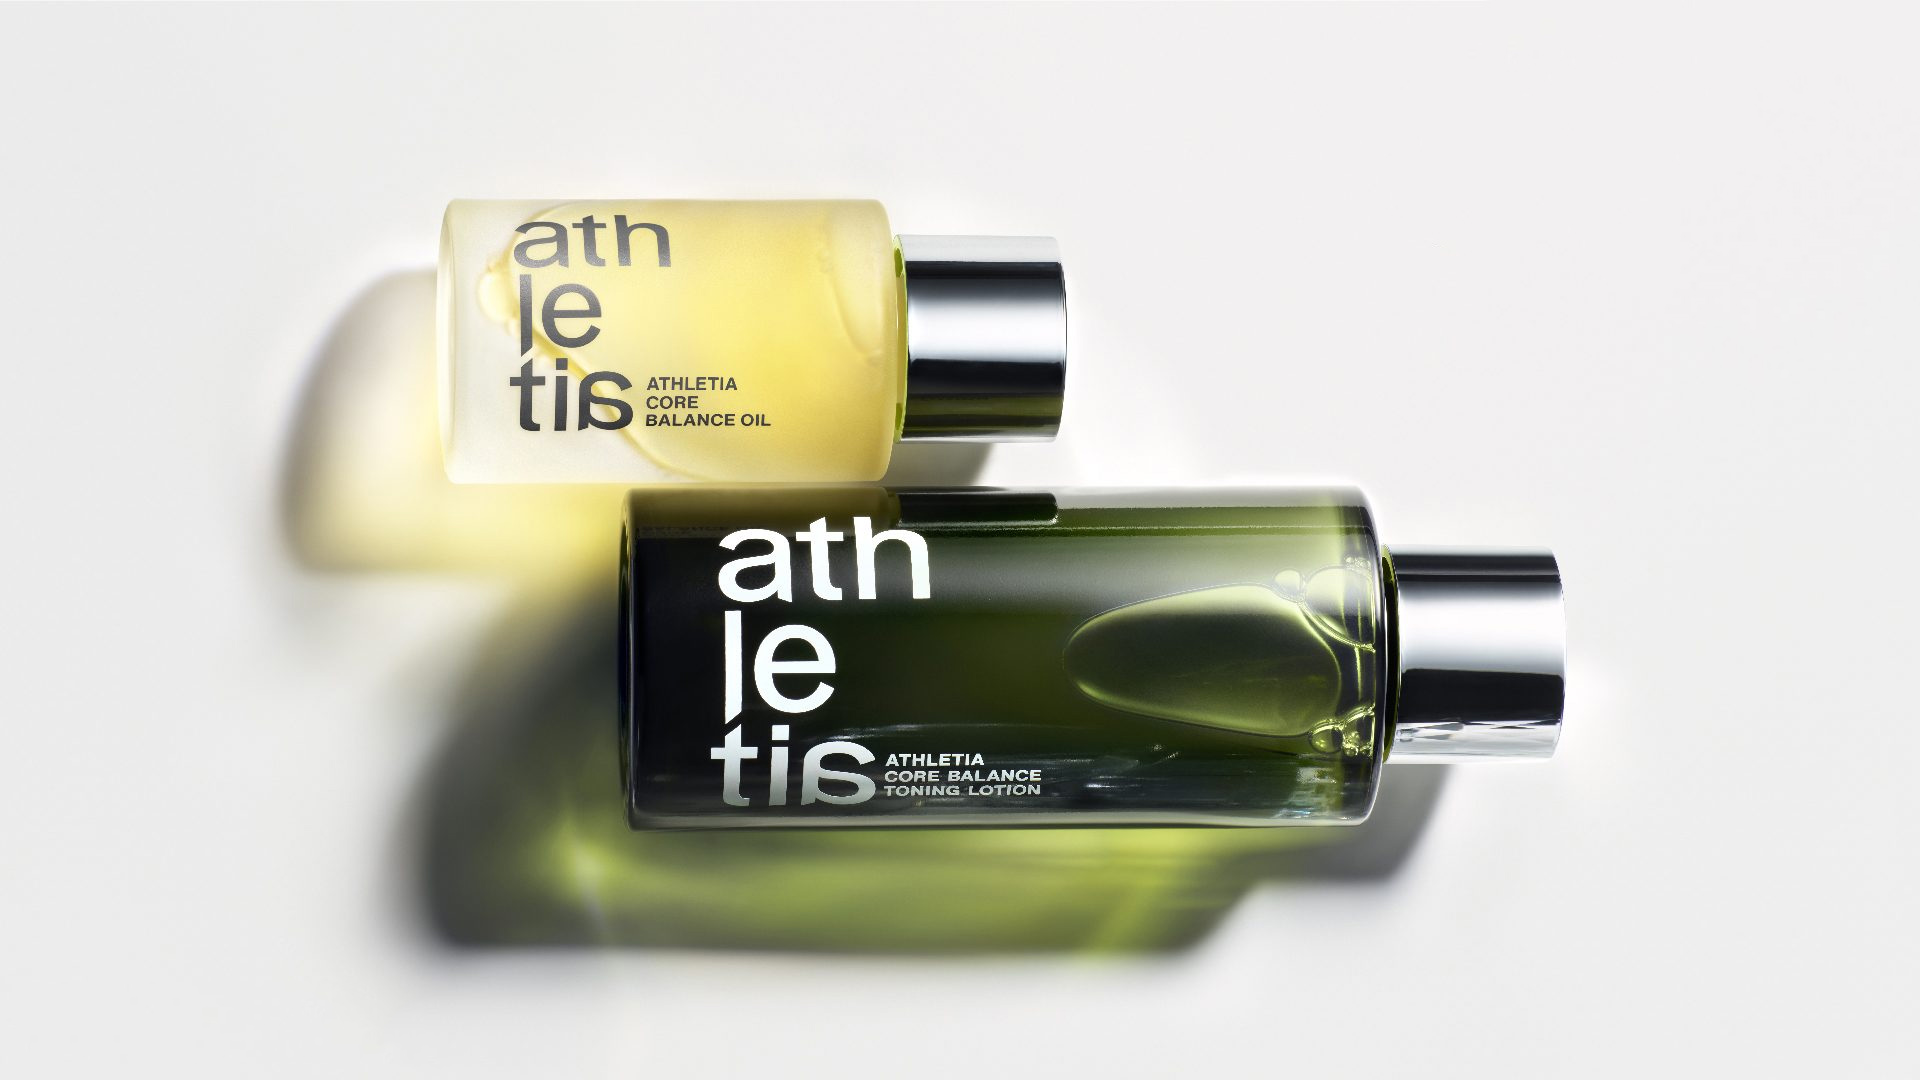 Athletia launches in UK - TheIndustry.beauty